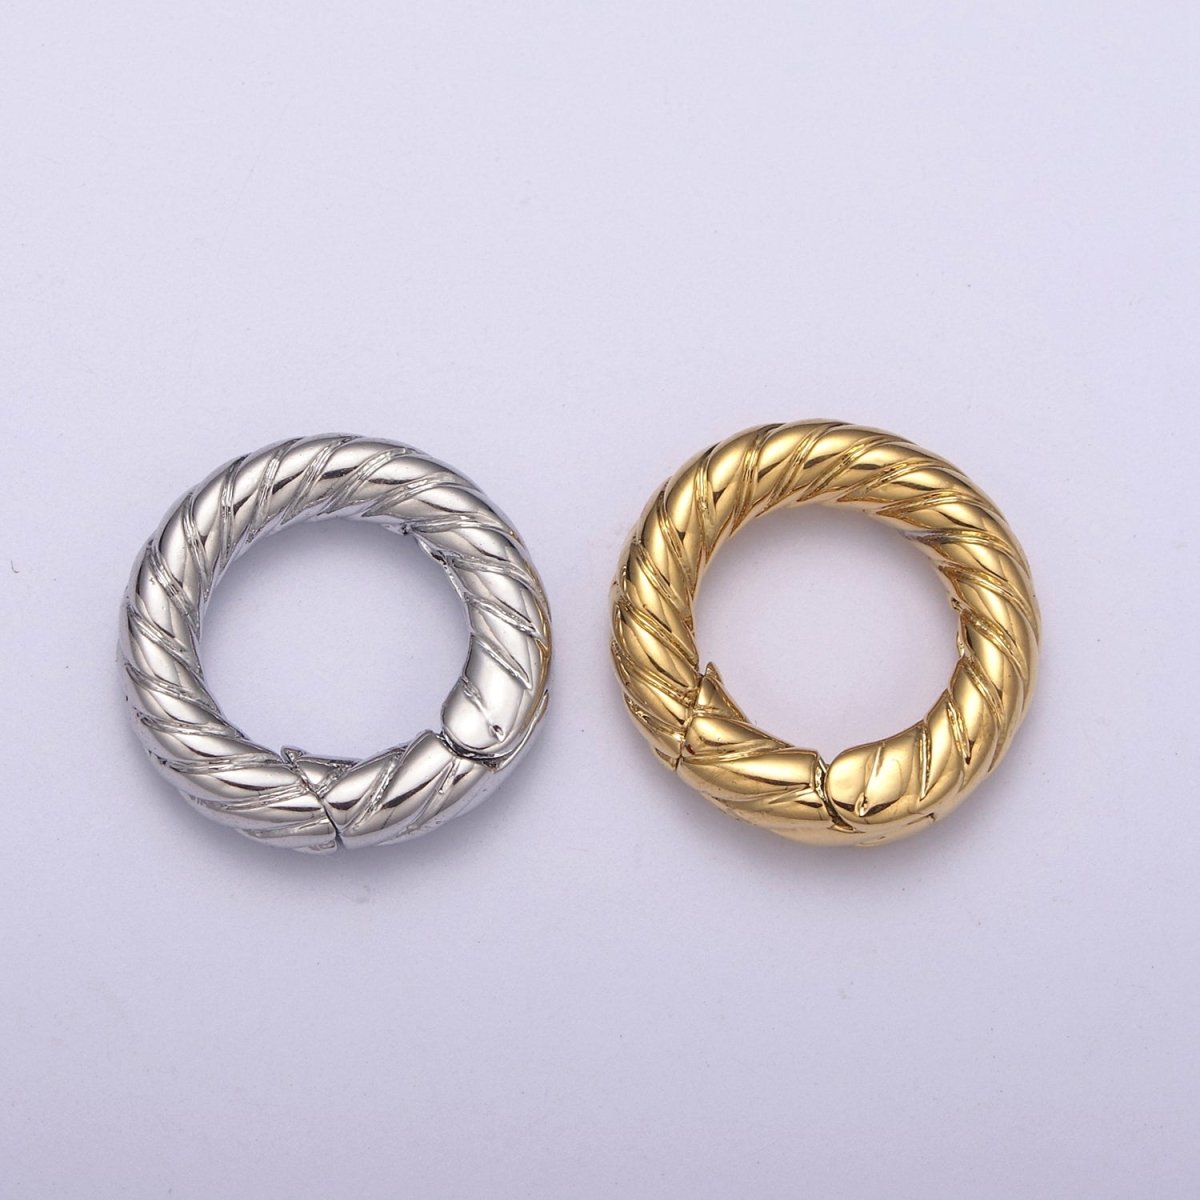 Mini Gold Push Gate ring, 15mm Round Twisted Rope Ring Charm Holder L-598 L-599 - DLUXCA